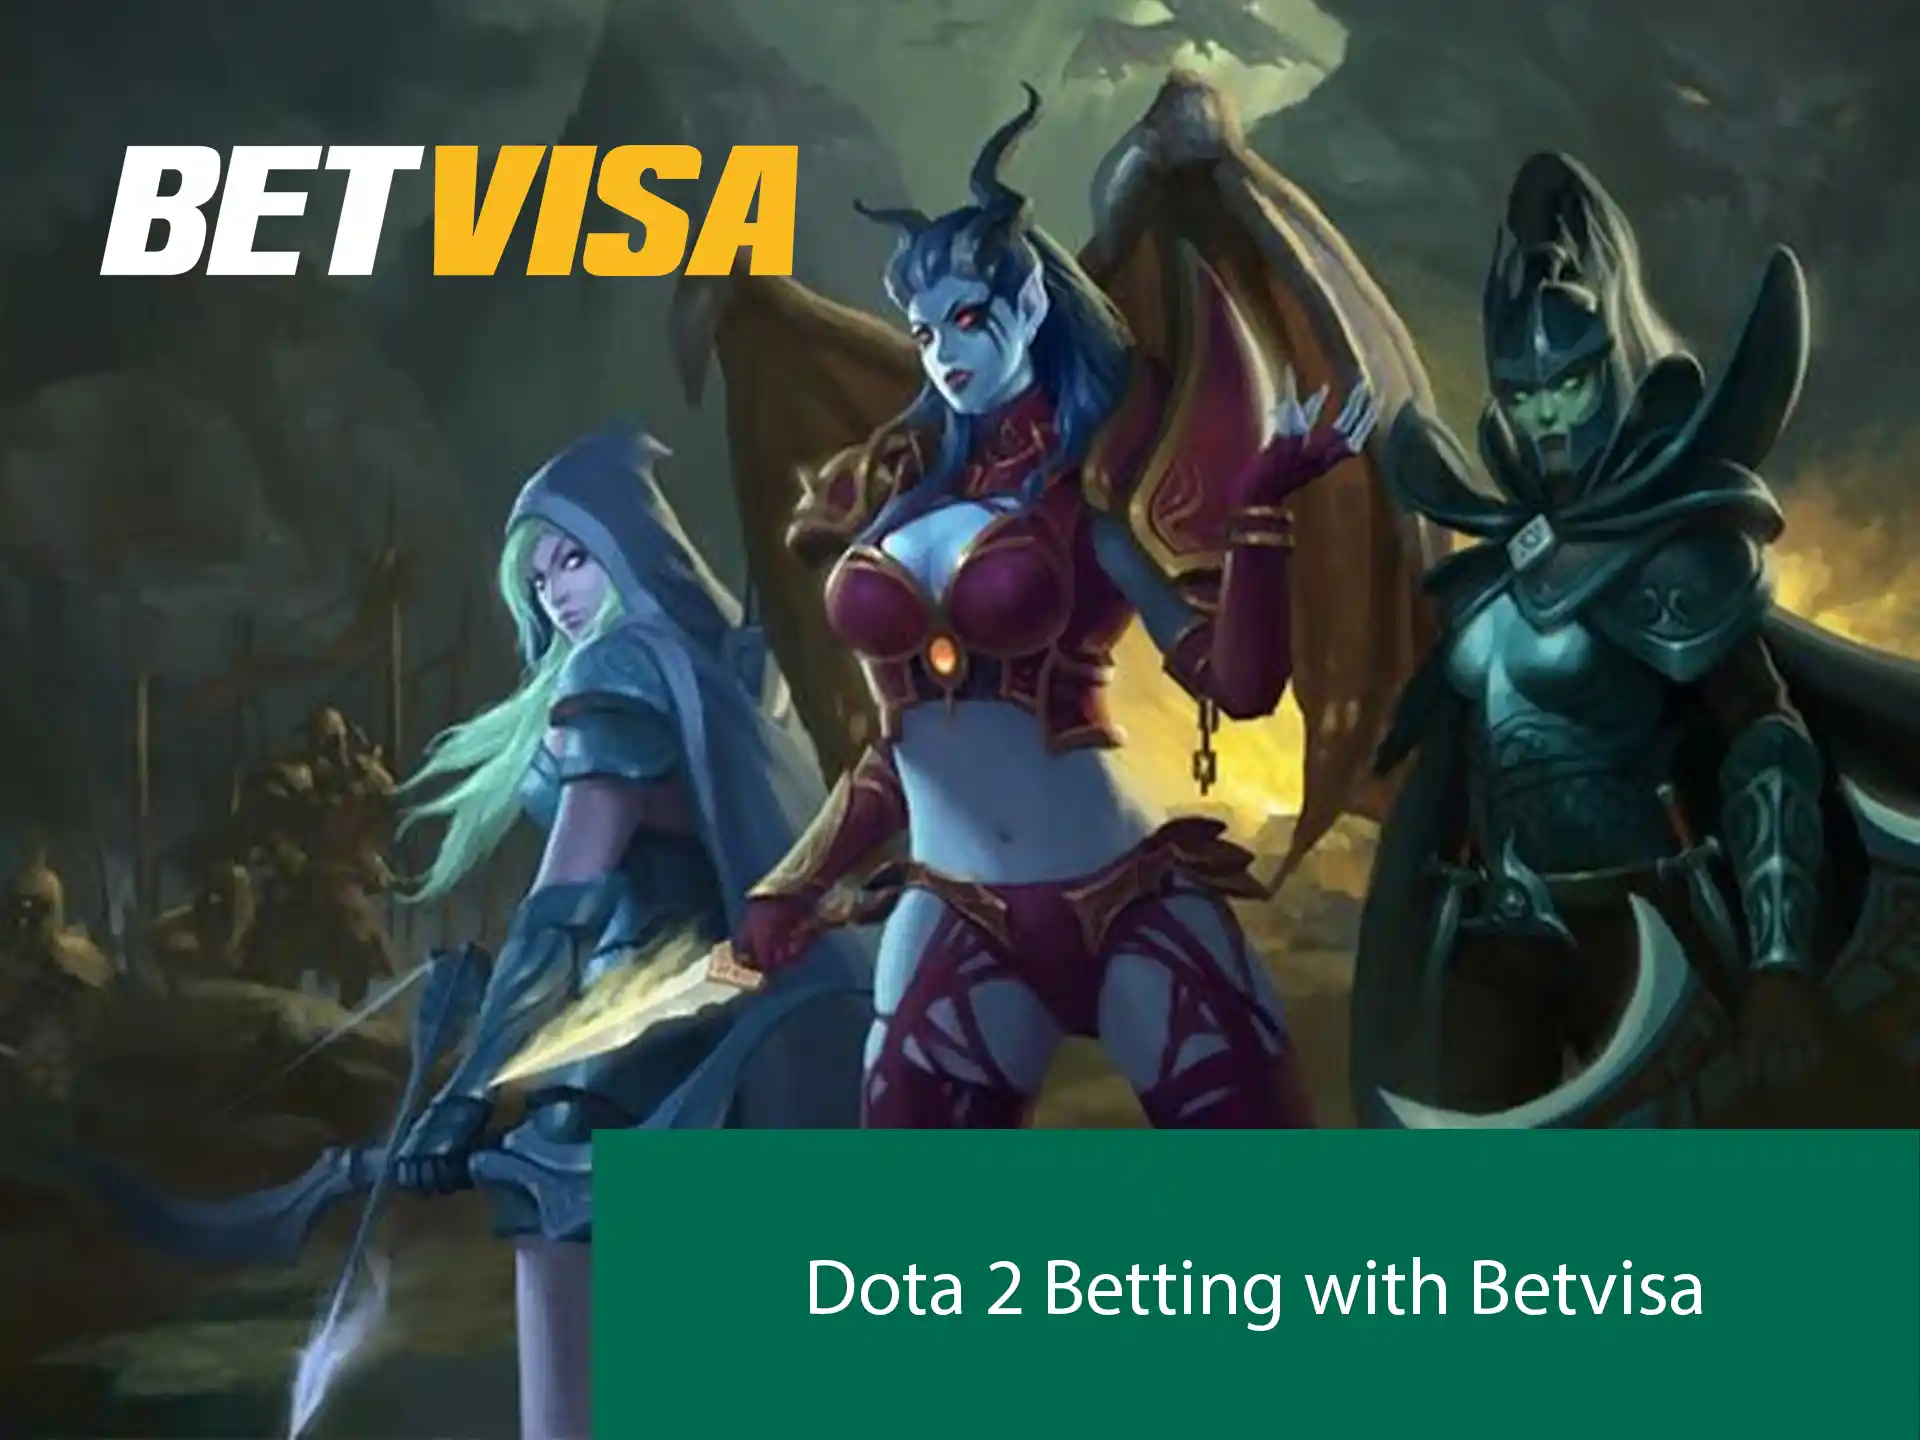 Get ready to bet during The International Championship Dota 2 tournament at BetVisa.